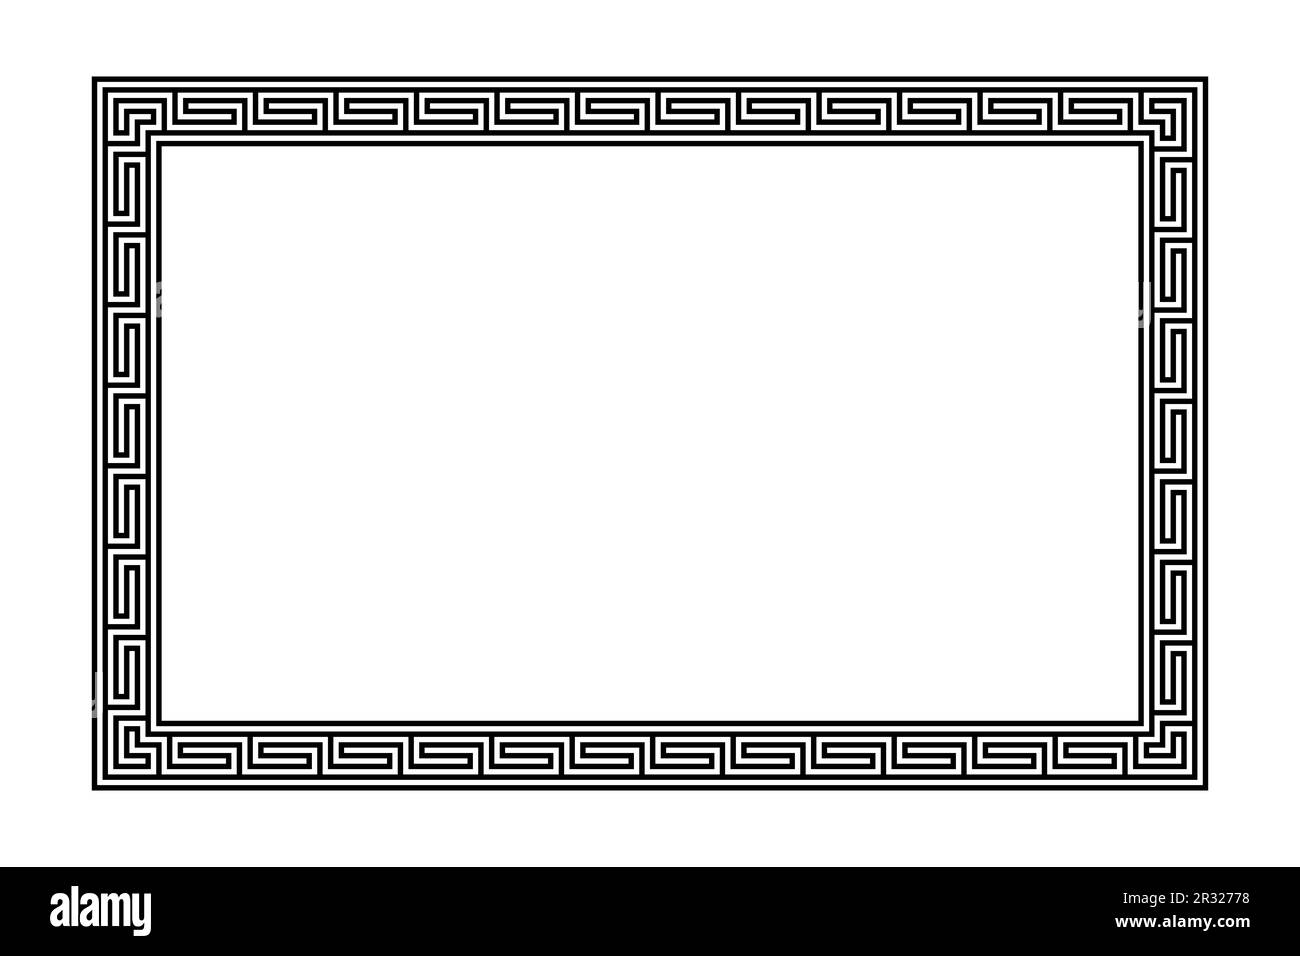 Rectangle frame with Greek fret ornament and a seamless meander pattern. Decorative oblong border, constructed from continuous lines. Stock Photo